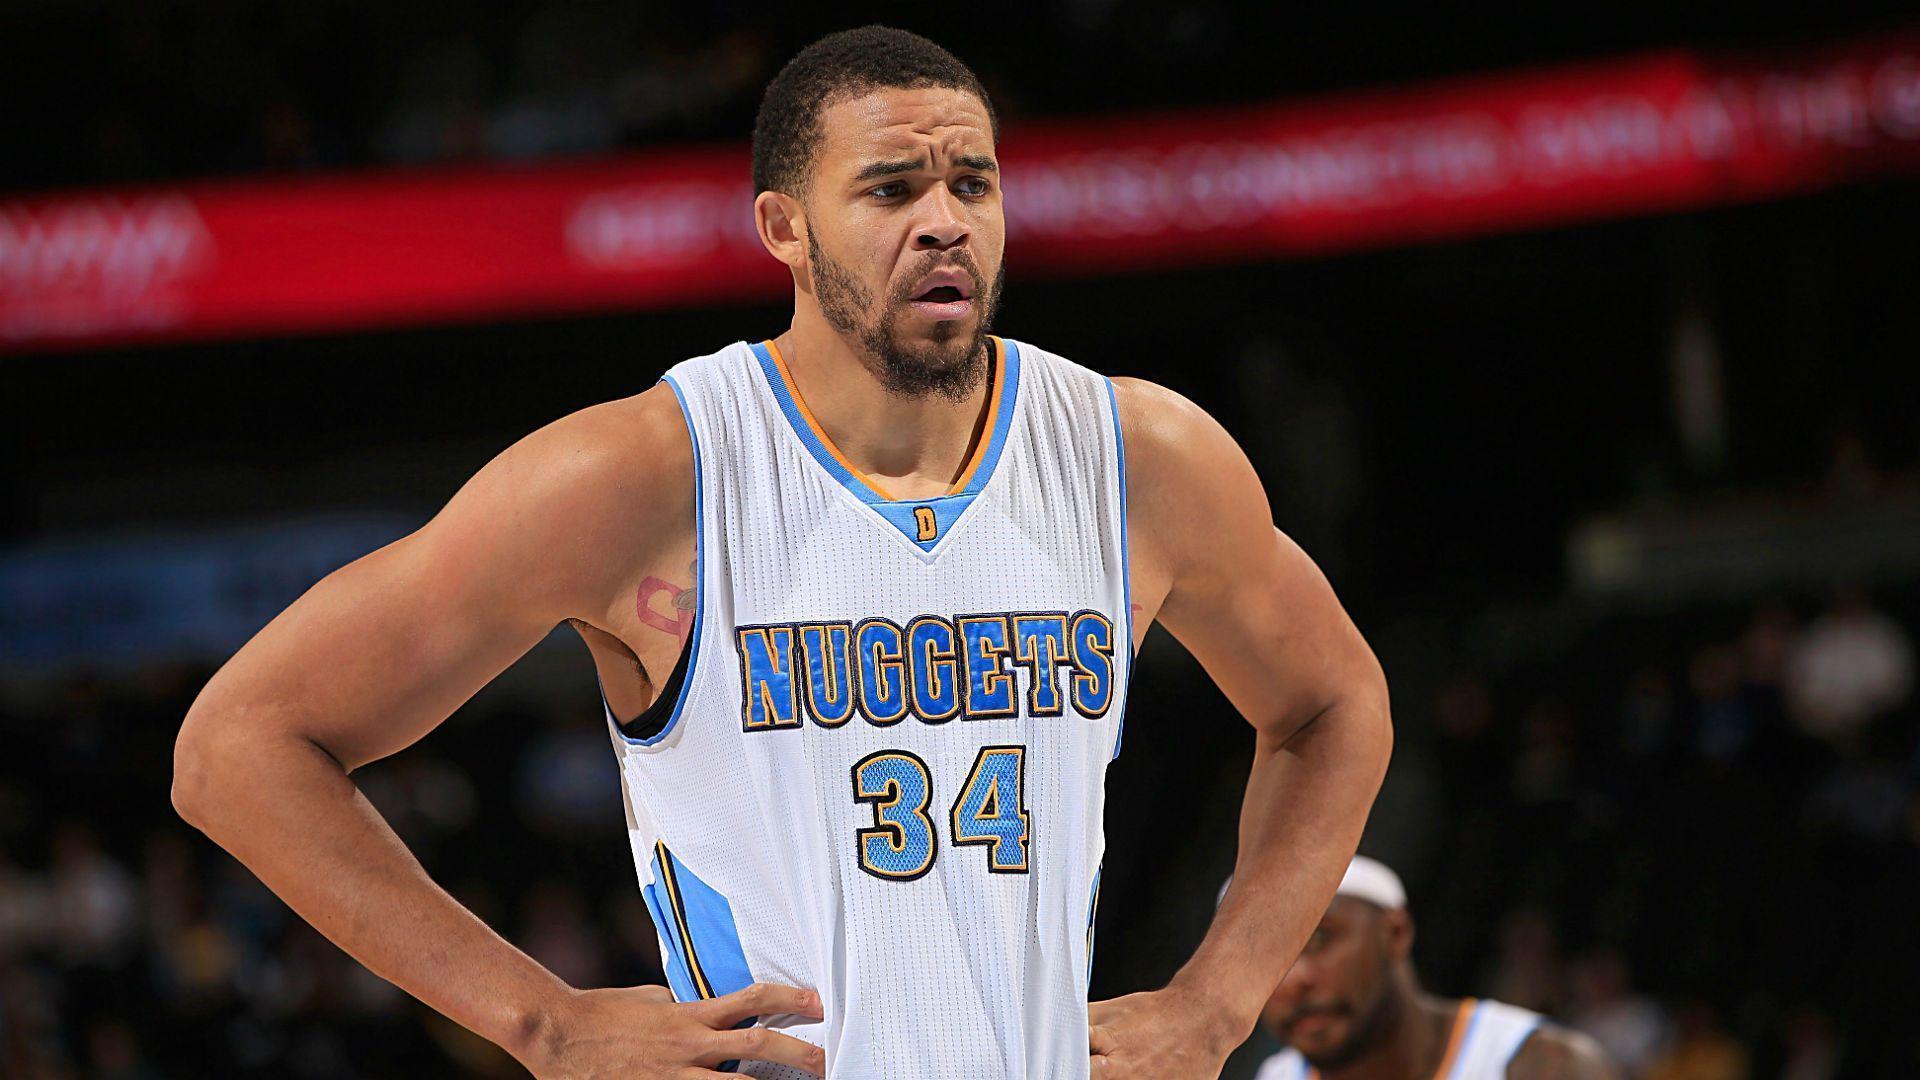 Images: JaVale McGee